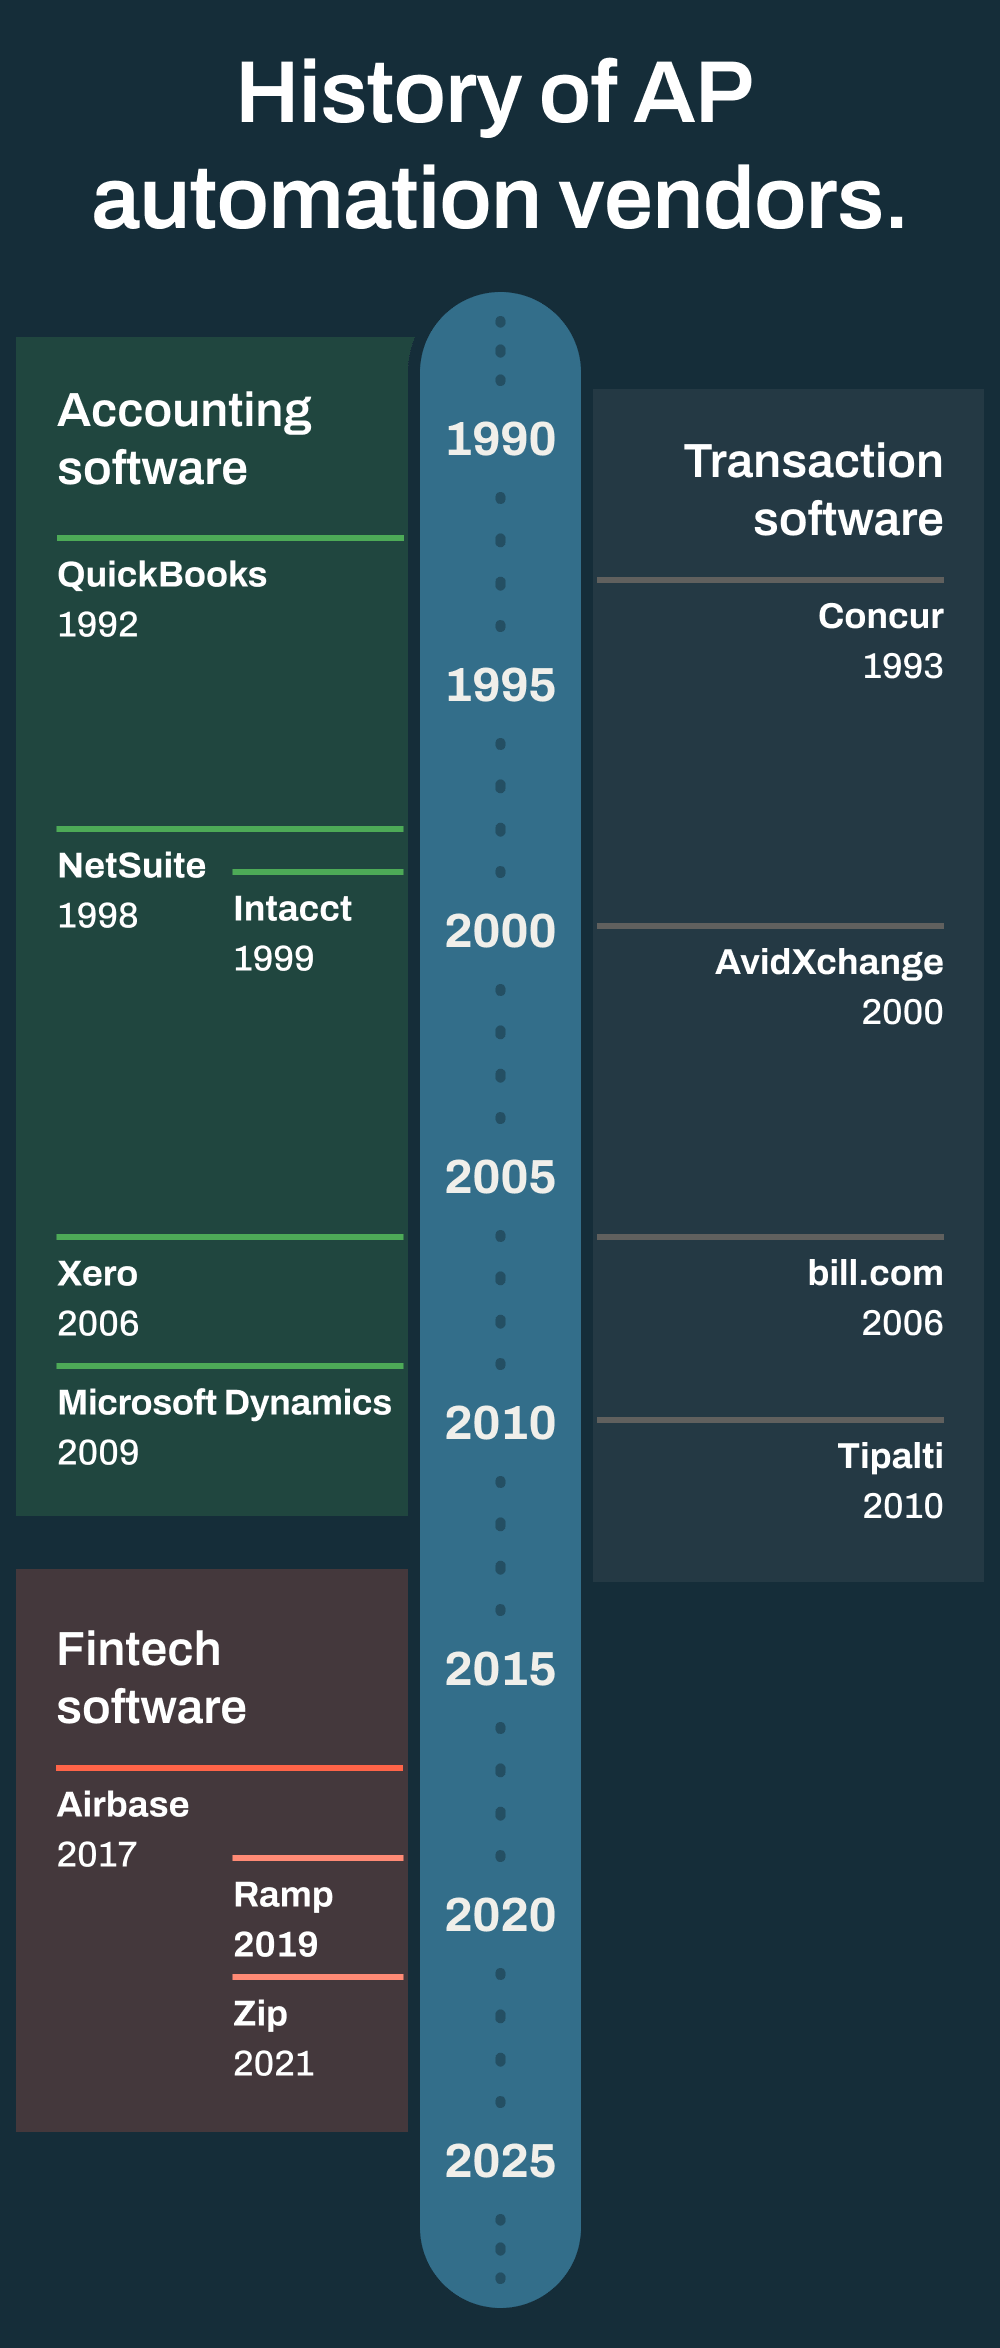 History of AP automation vendors.